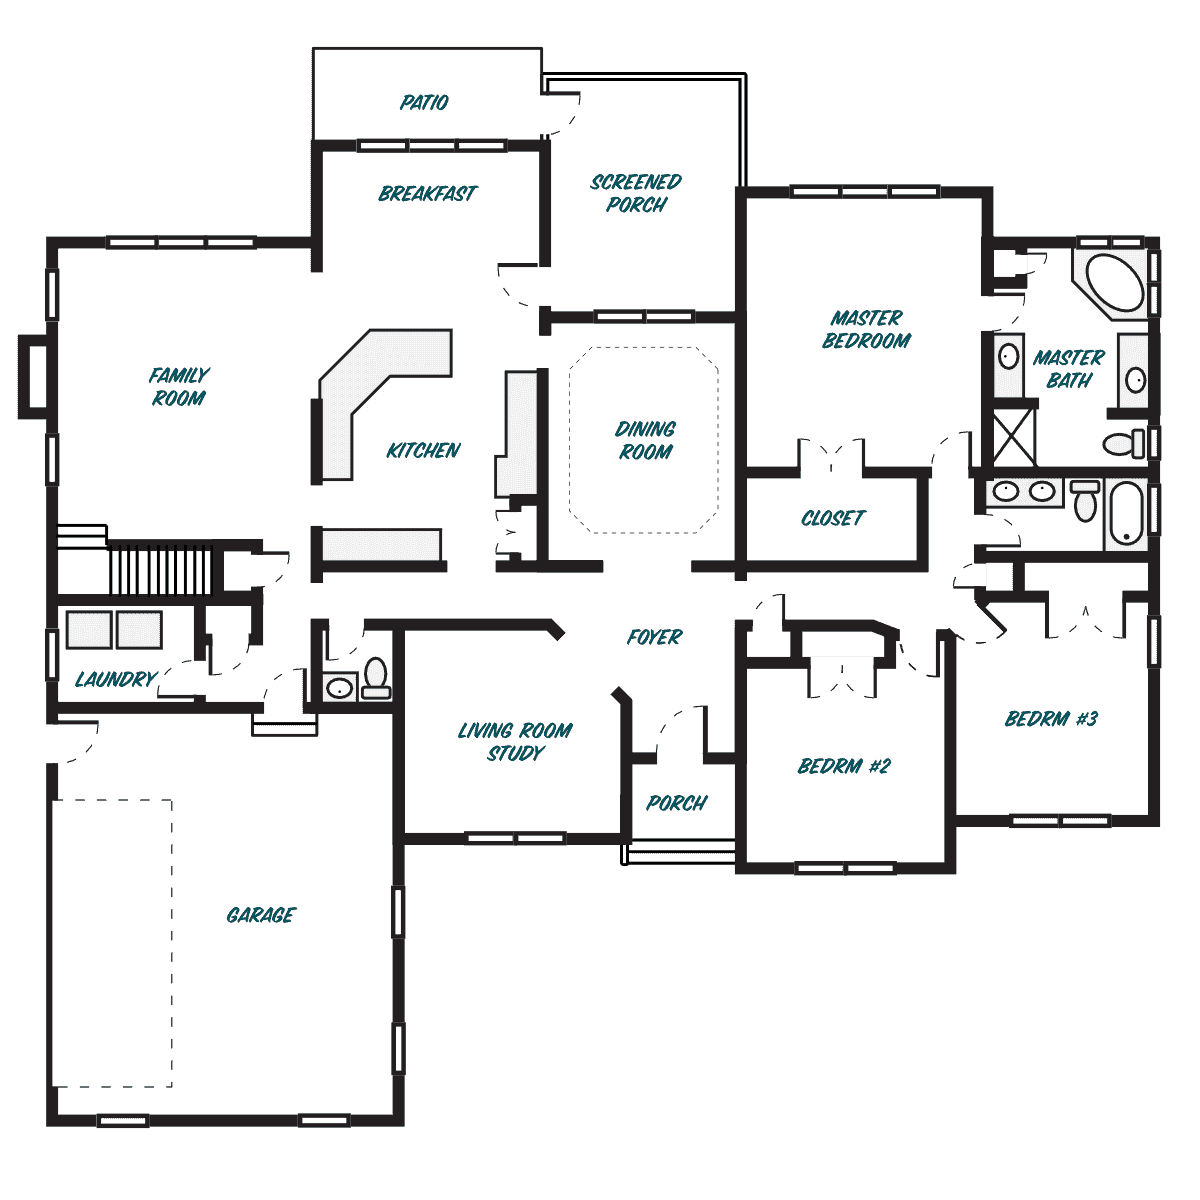 The NewHavenII House Plans and Floorplans Stephen